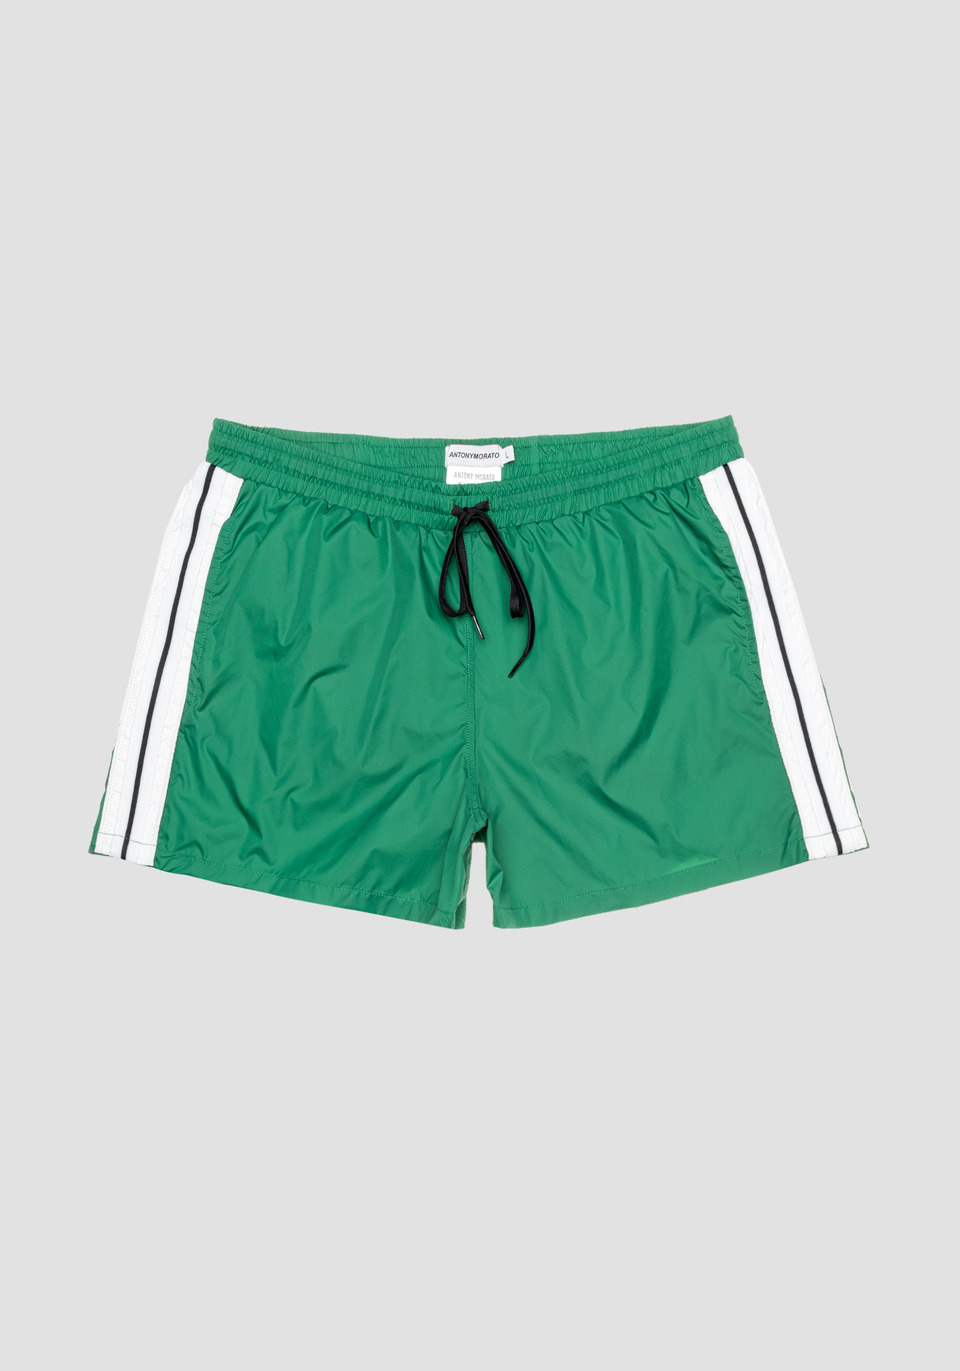 SLIM FIT SWIMMING TRUNKS IN TECHNICAL FABRIC - Antony Morato Online Shop